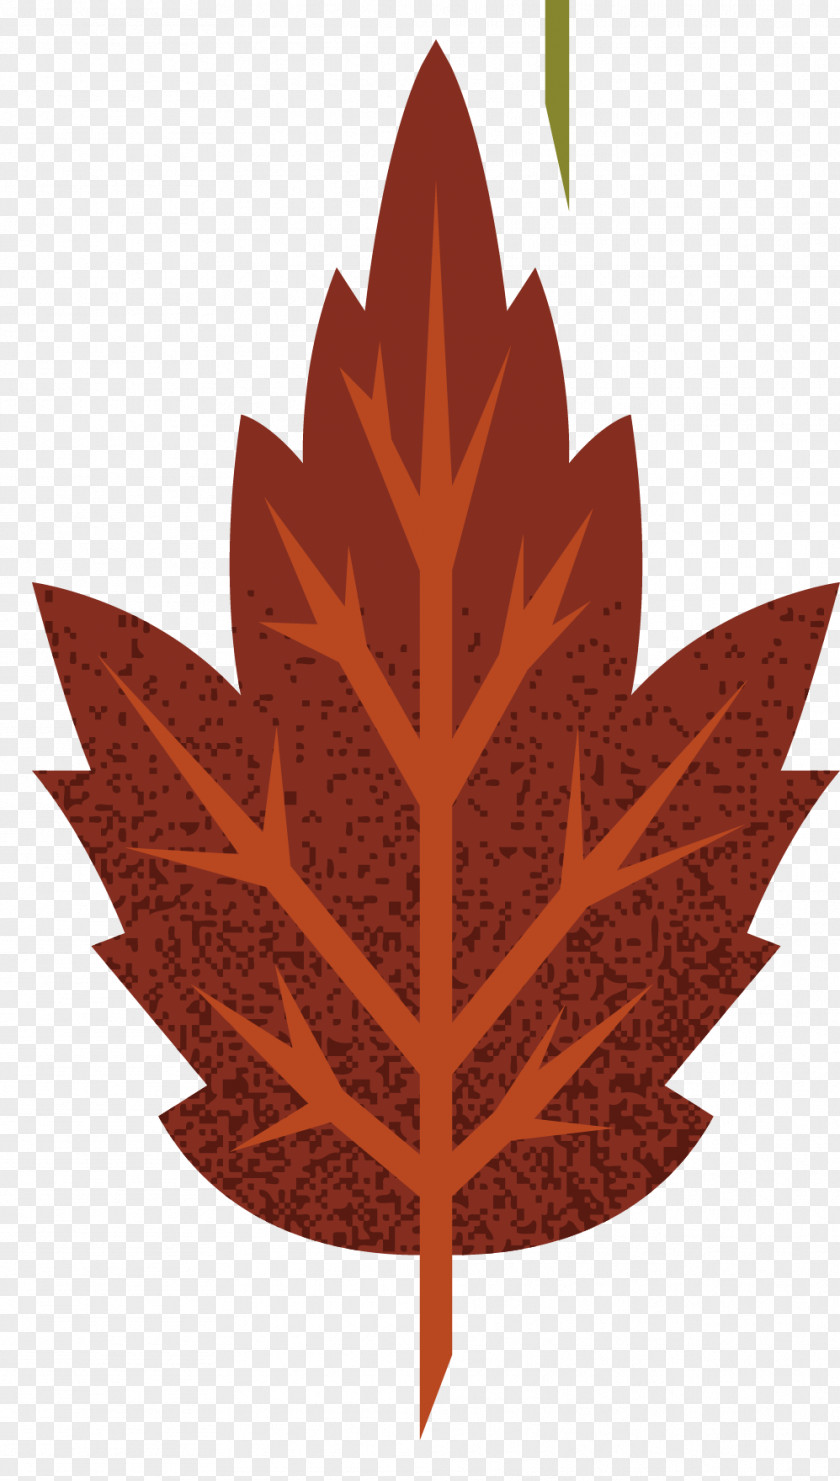 Autumn Leaves Collection Vector Material Maple Leaf PNG